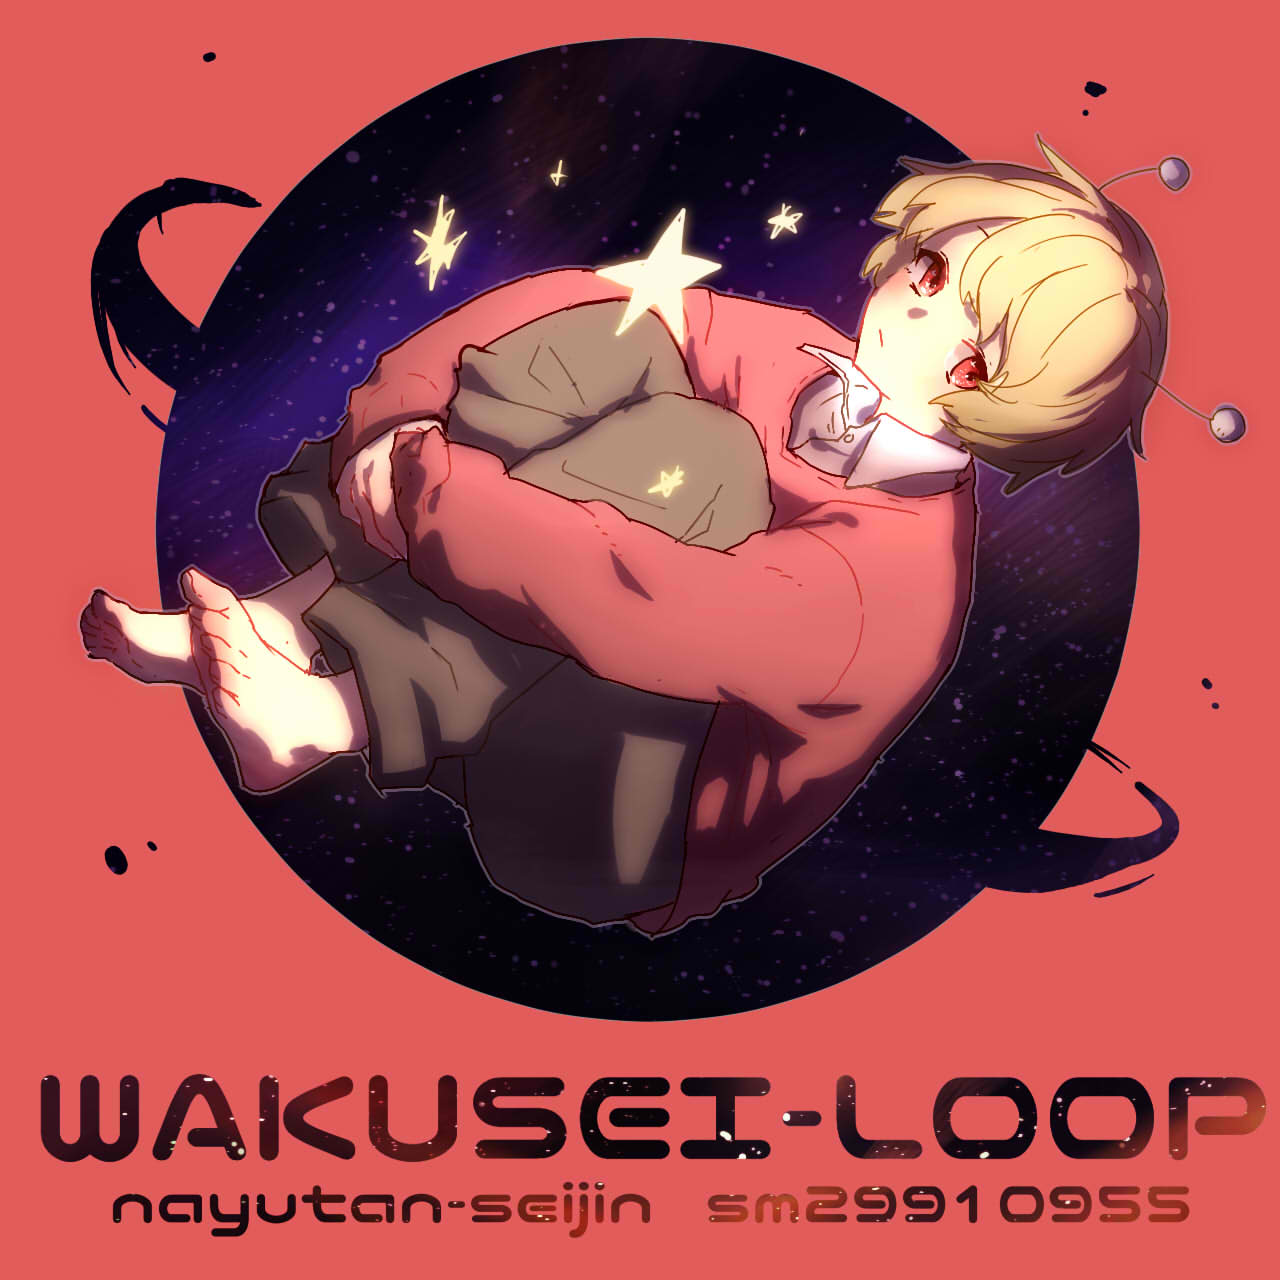 1boy antennae barefoot blonde_hair fetal_position highres koniro looking_at_viewer male_focus niconico planet red_background red_eyes red_sweater school_uniform short_hair simple_background solo song_name sou_(niconico) star sweater vocaloid wakusei_loop_(vocaloid)